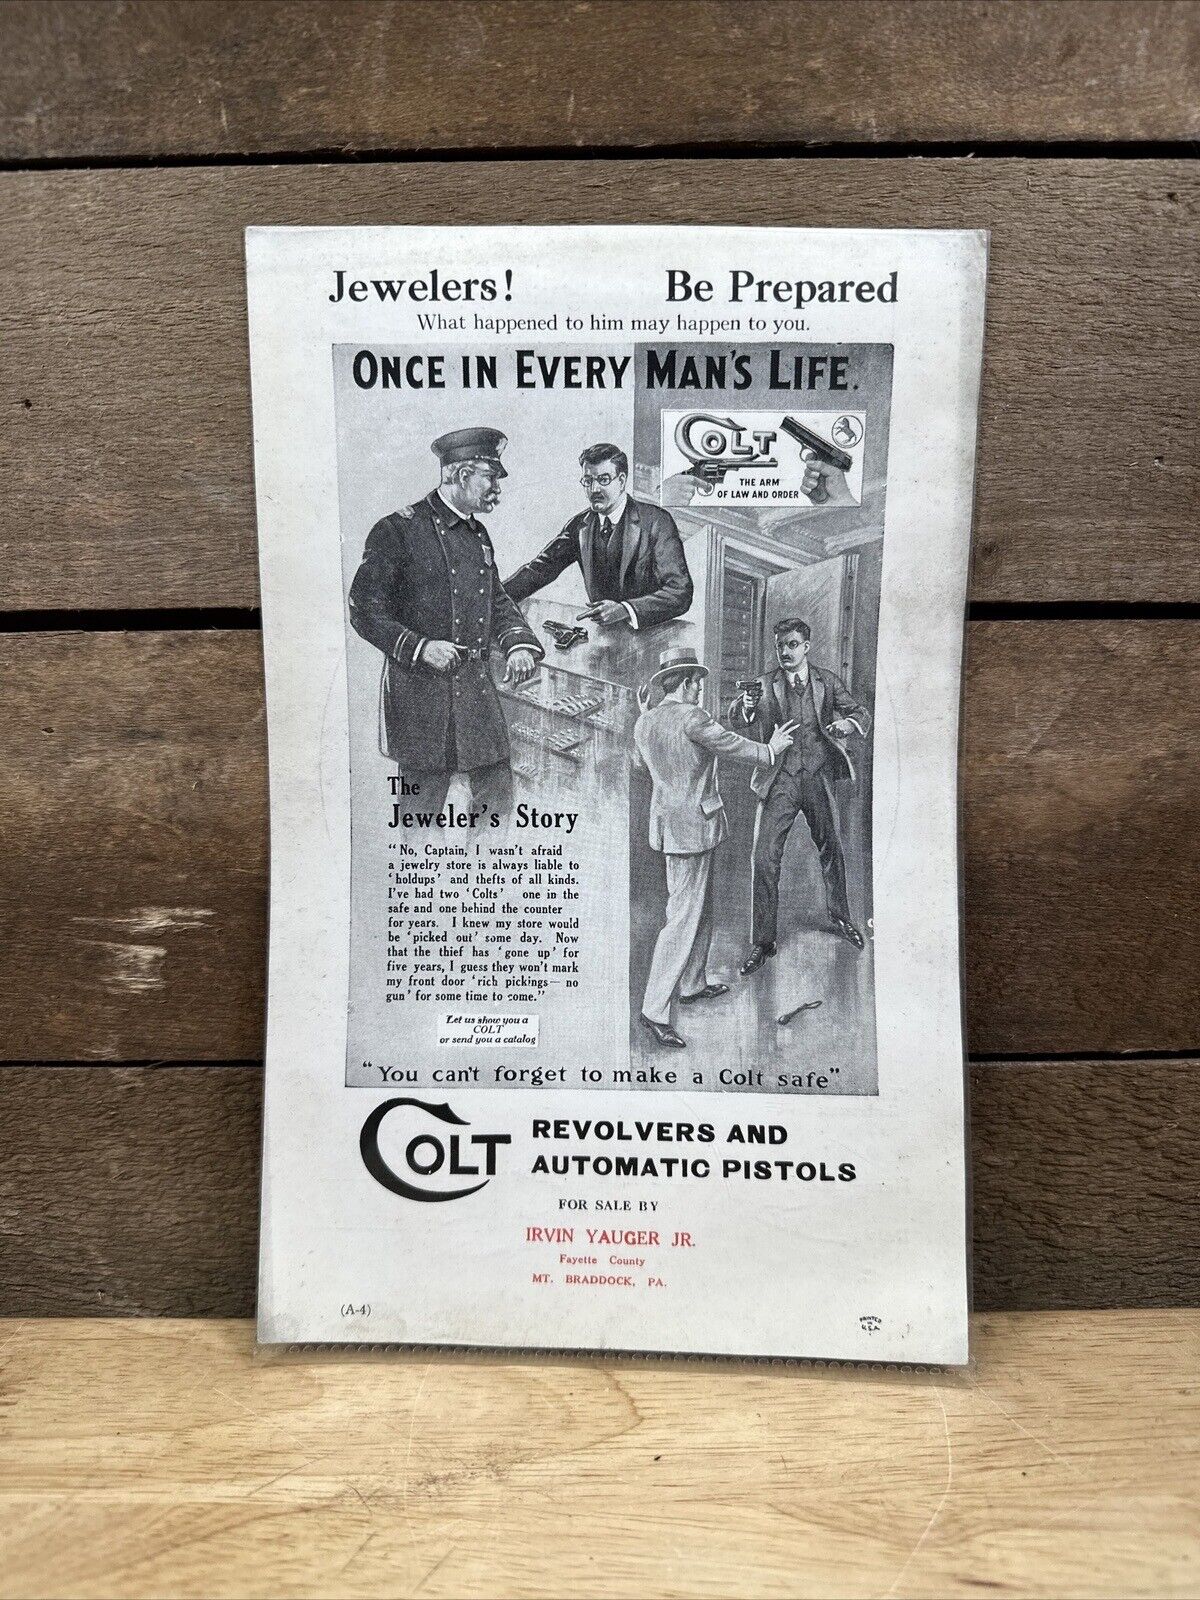 Vintage Early Colt Advertising Print “The Jeweler’s Story” / 12 Yard Target